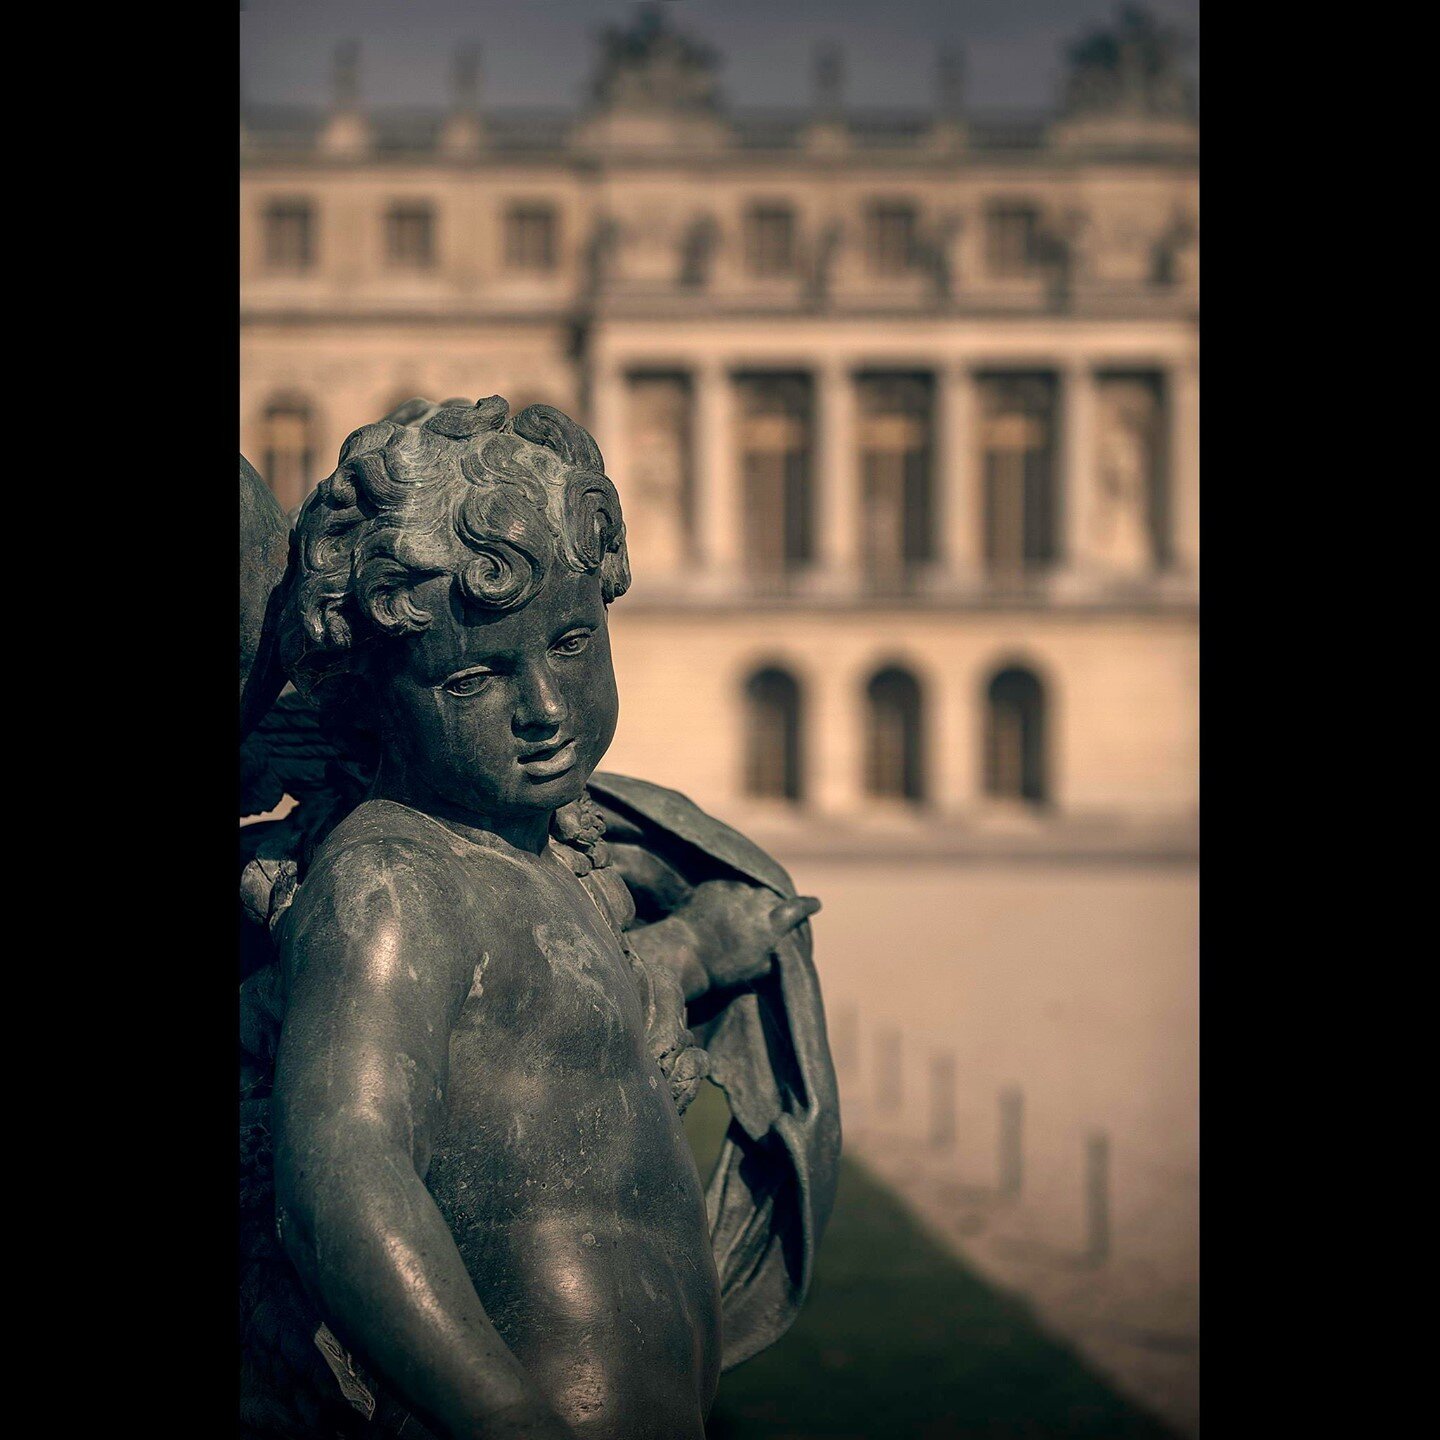 Chateau de Versailles, France⁣
⁣
Louis XIV was born in Paris in 1638, he was the eldest son of King Louis XIII. Louis was the oldest of only two surviving boys.  In 1643, Louis XIII died at the age of 41.  He had planned a regency council who would r